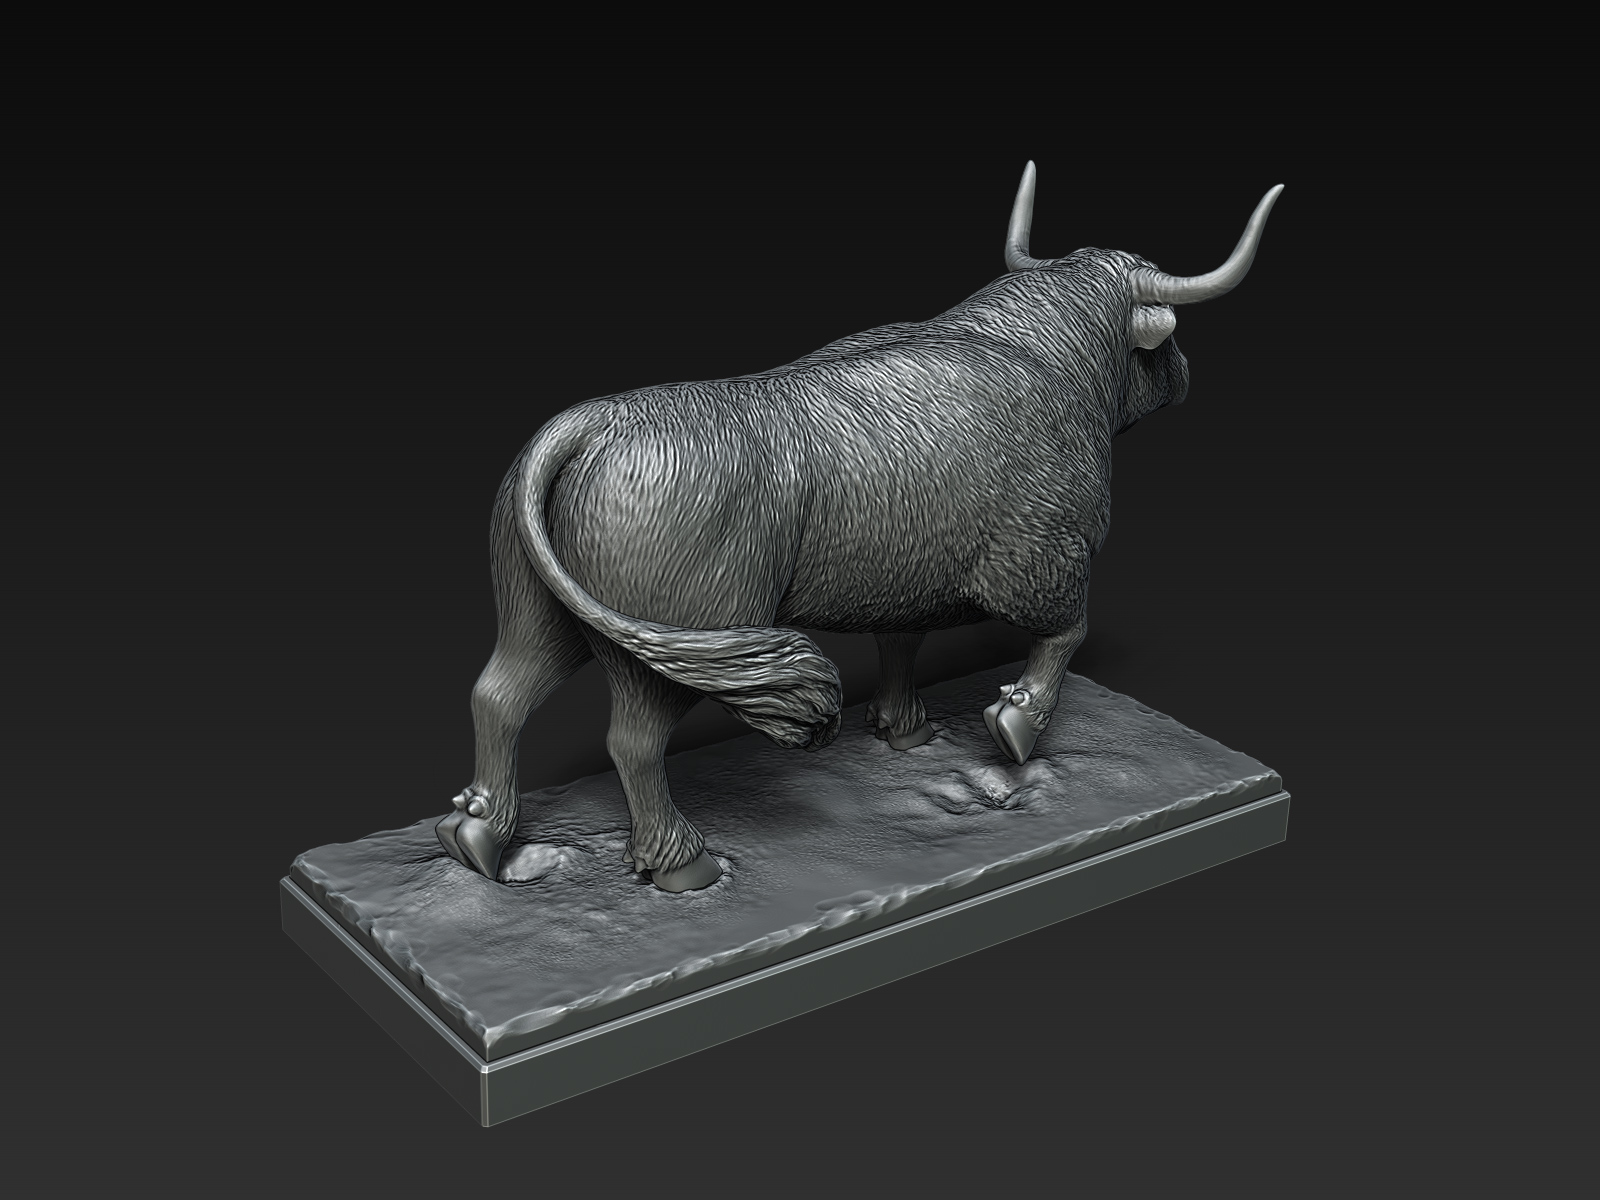 Digital sculpture of the Bull. Creation of sculpture for 3D printing and production.